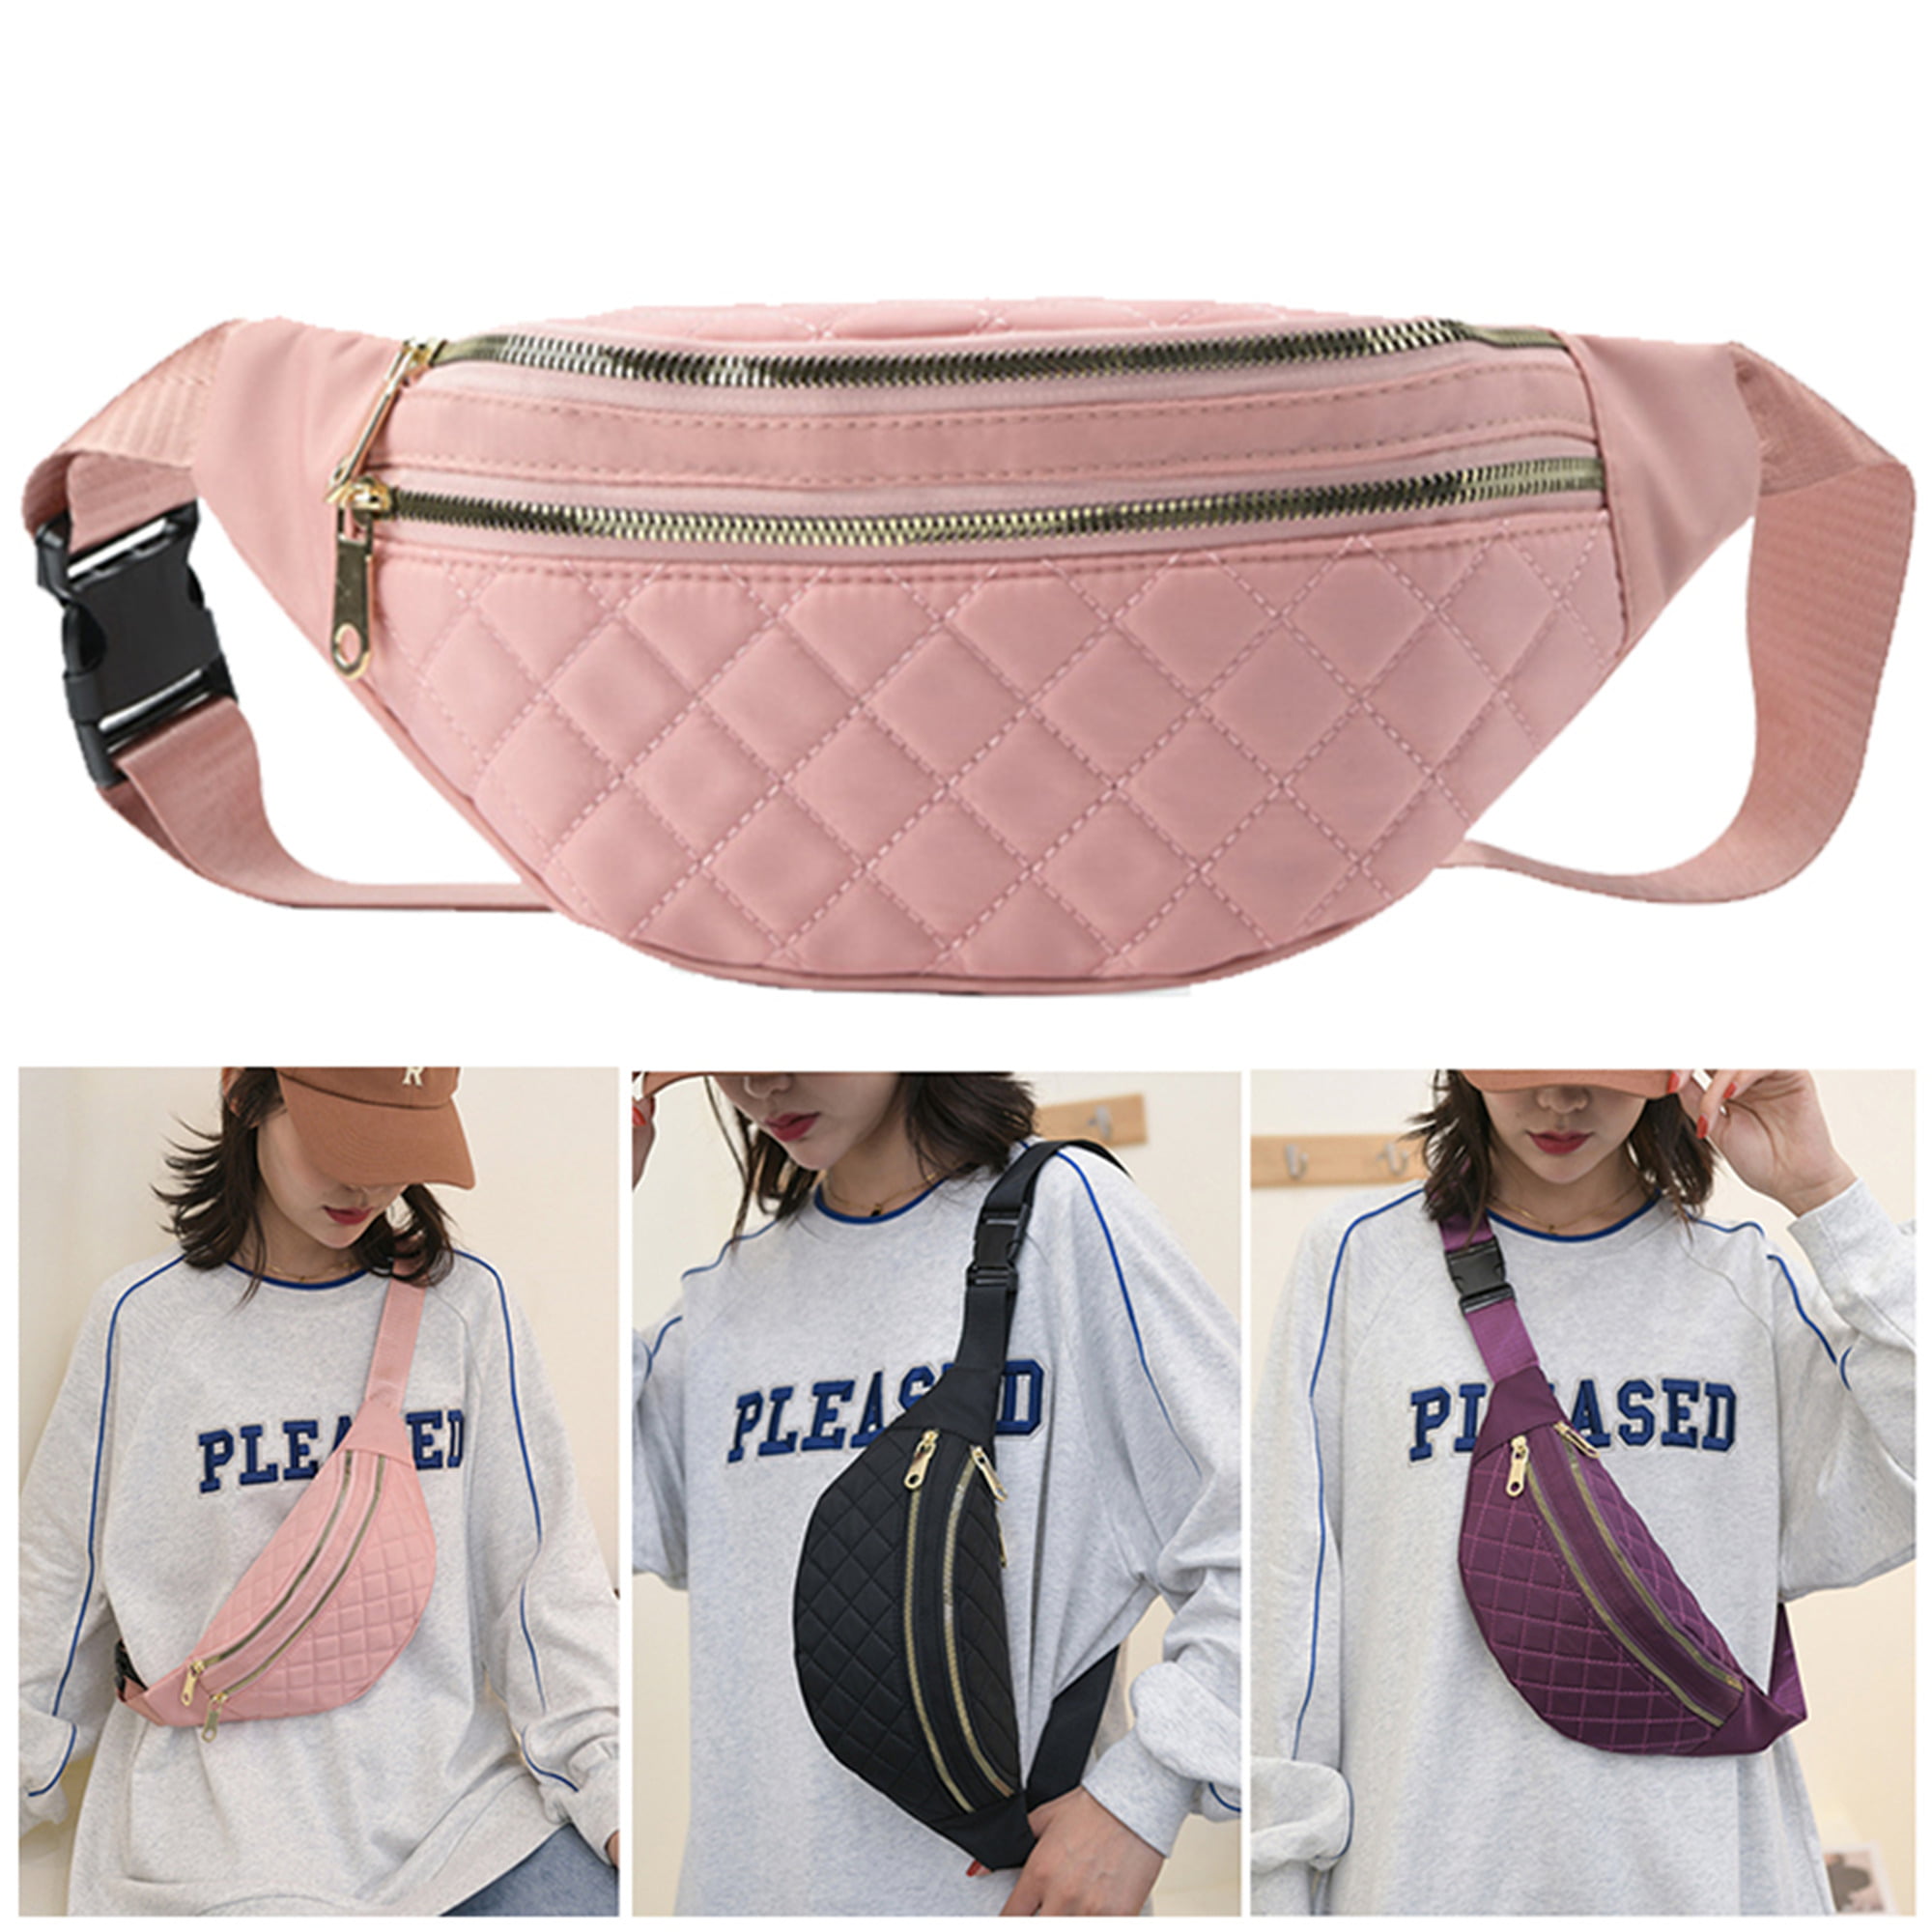 Elbourn 1 Pack Fanny Pack Waist Pack for Women,Fashion Belt Bags Gifts ...